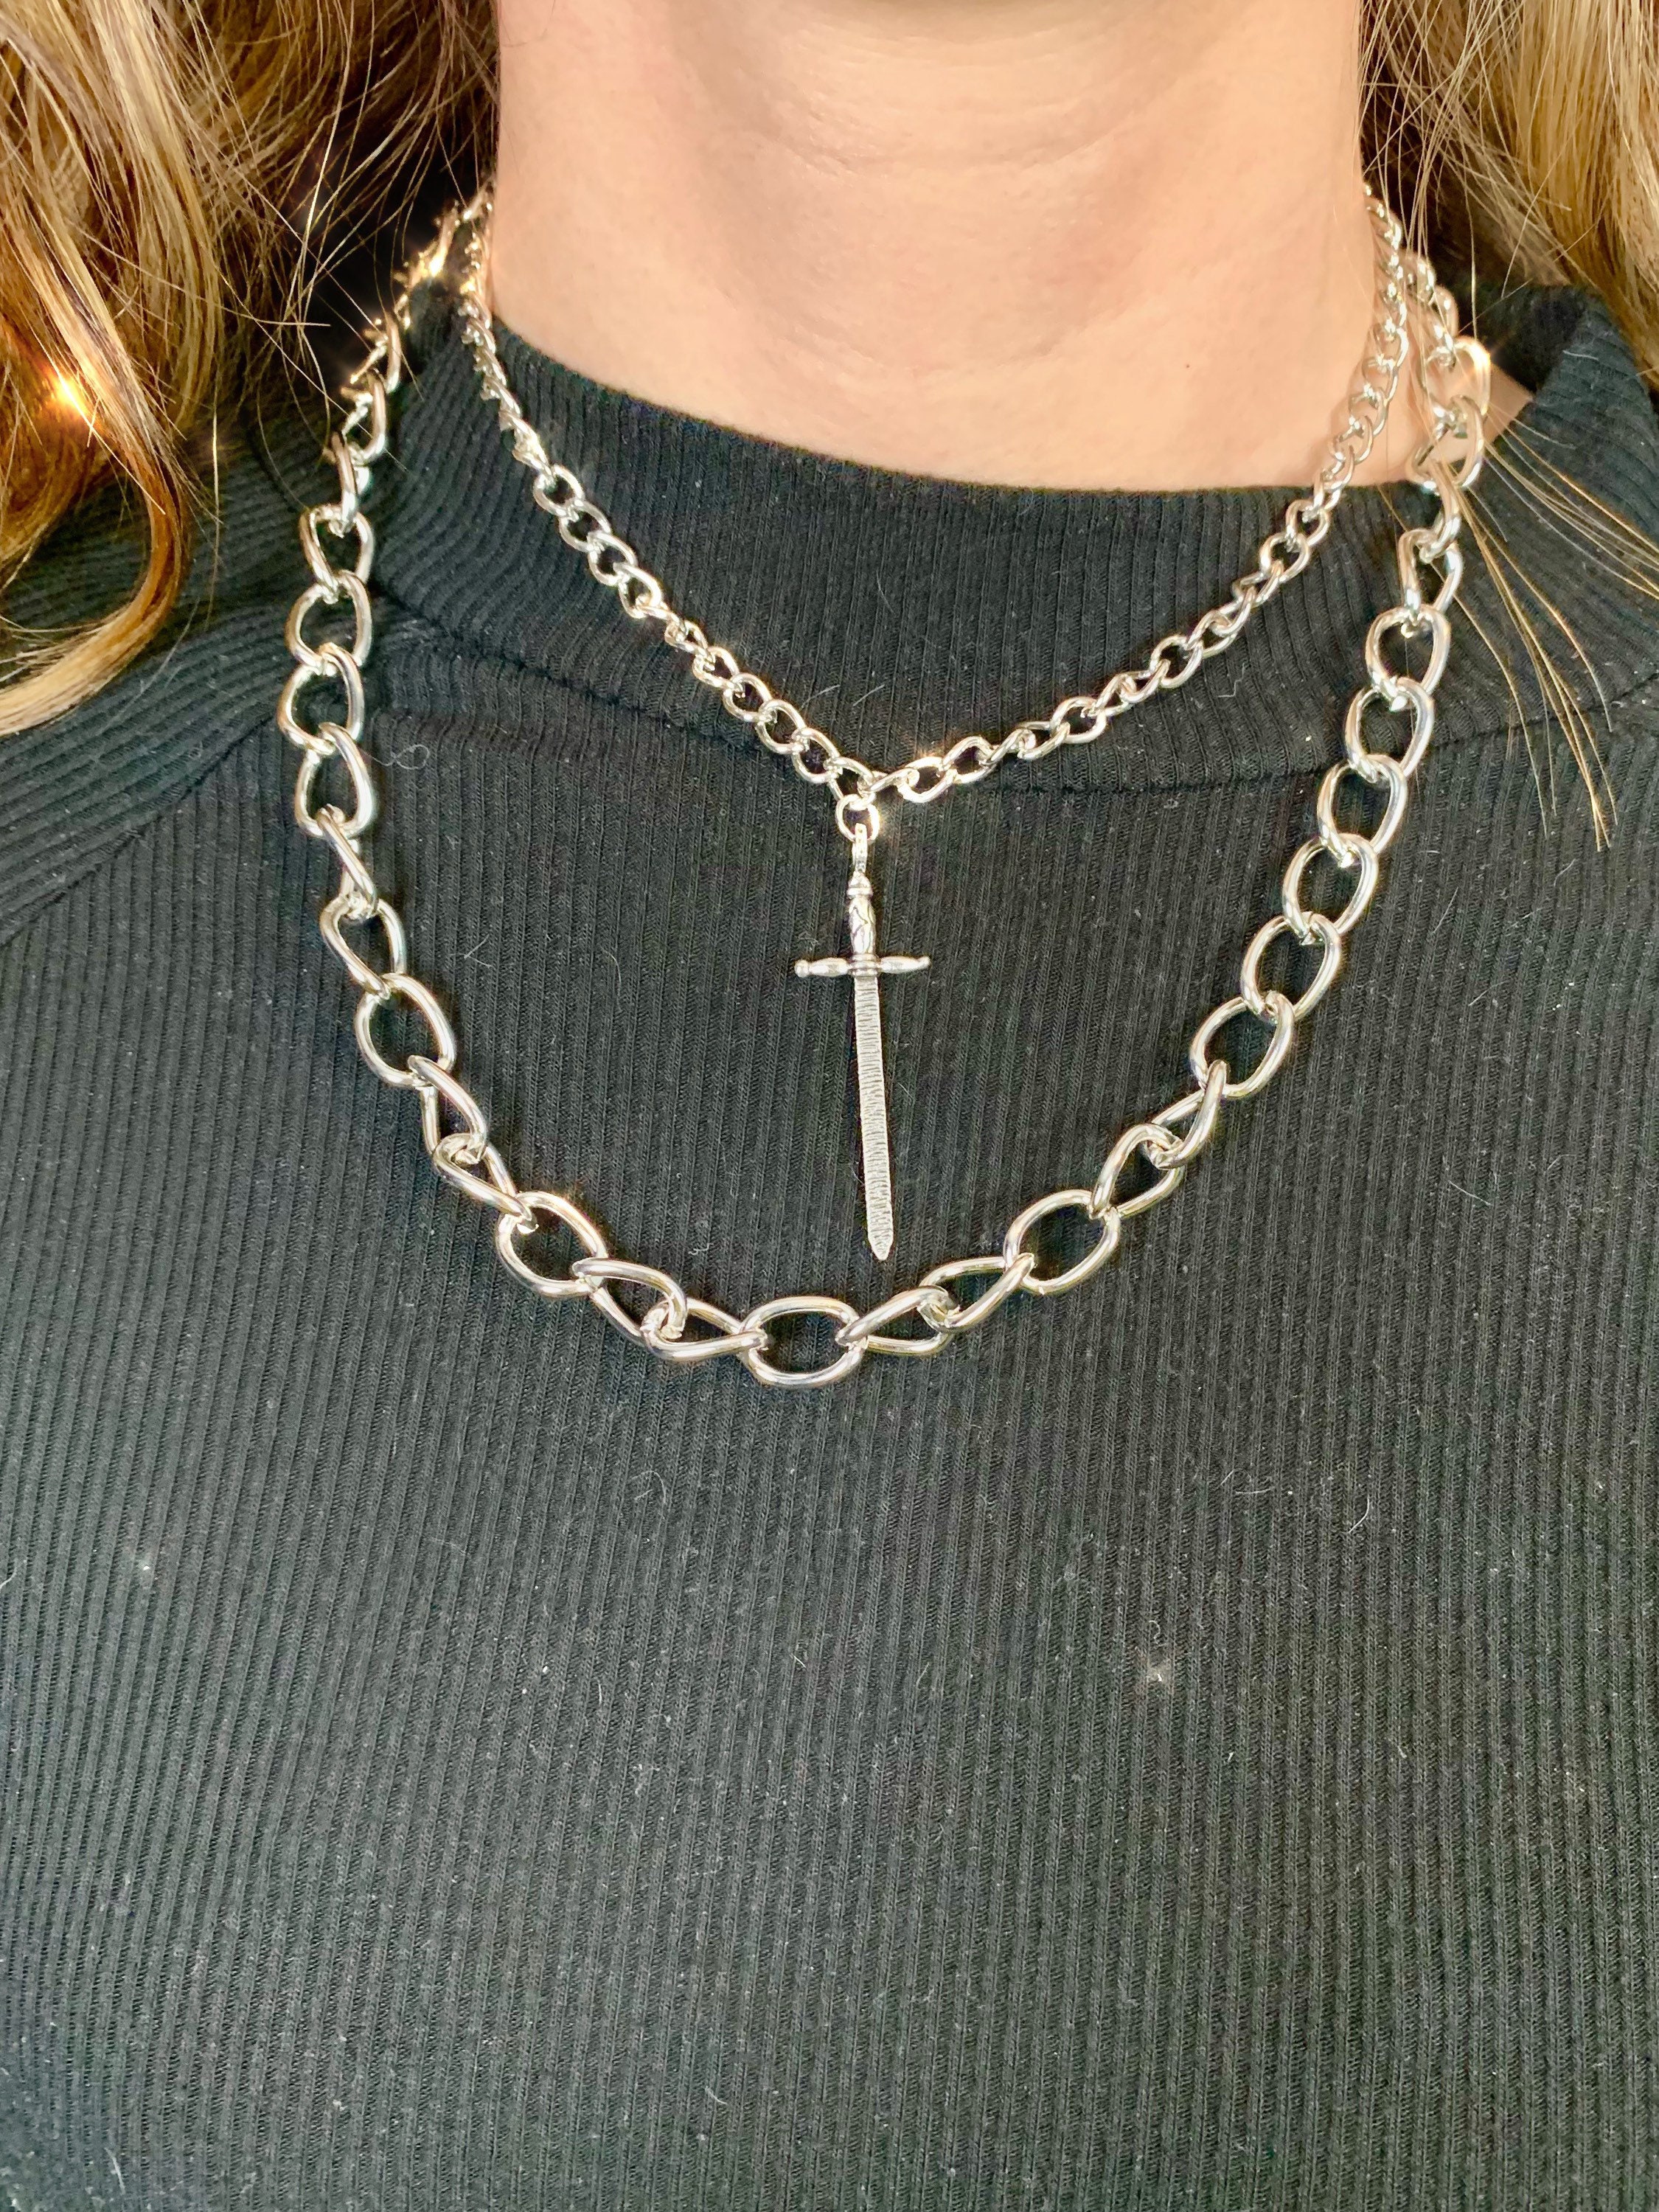 Egirl Sword Chain and Curb Chain Necklaces Baddie Necklace | Etsy